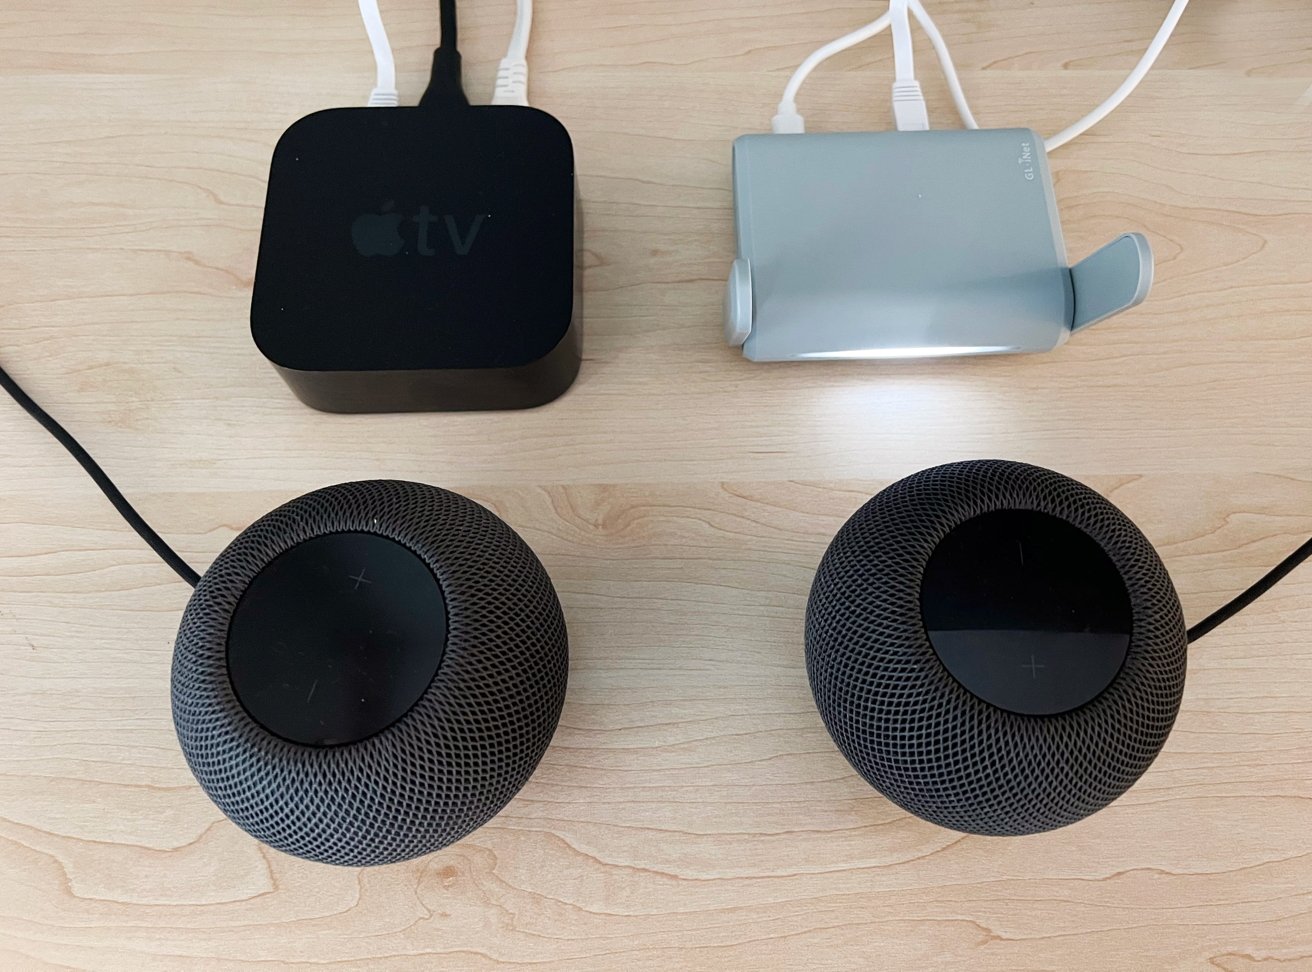 You may want to connect HomePods and an Apple TV, but a hotel's network usually isn't set up to allow that to happen. 